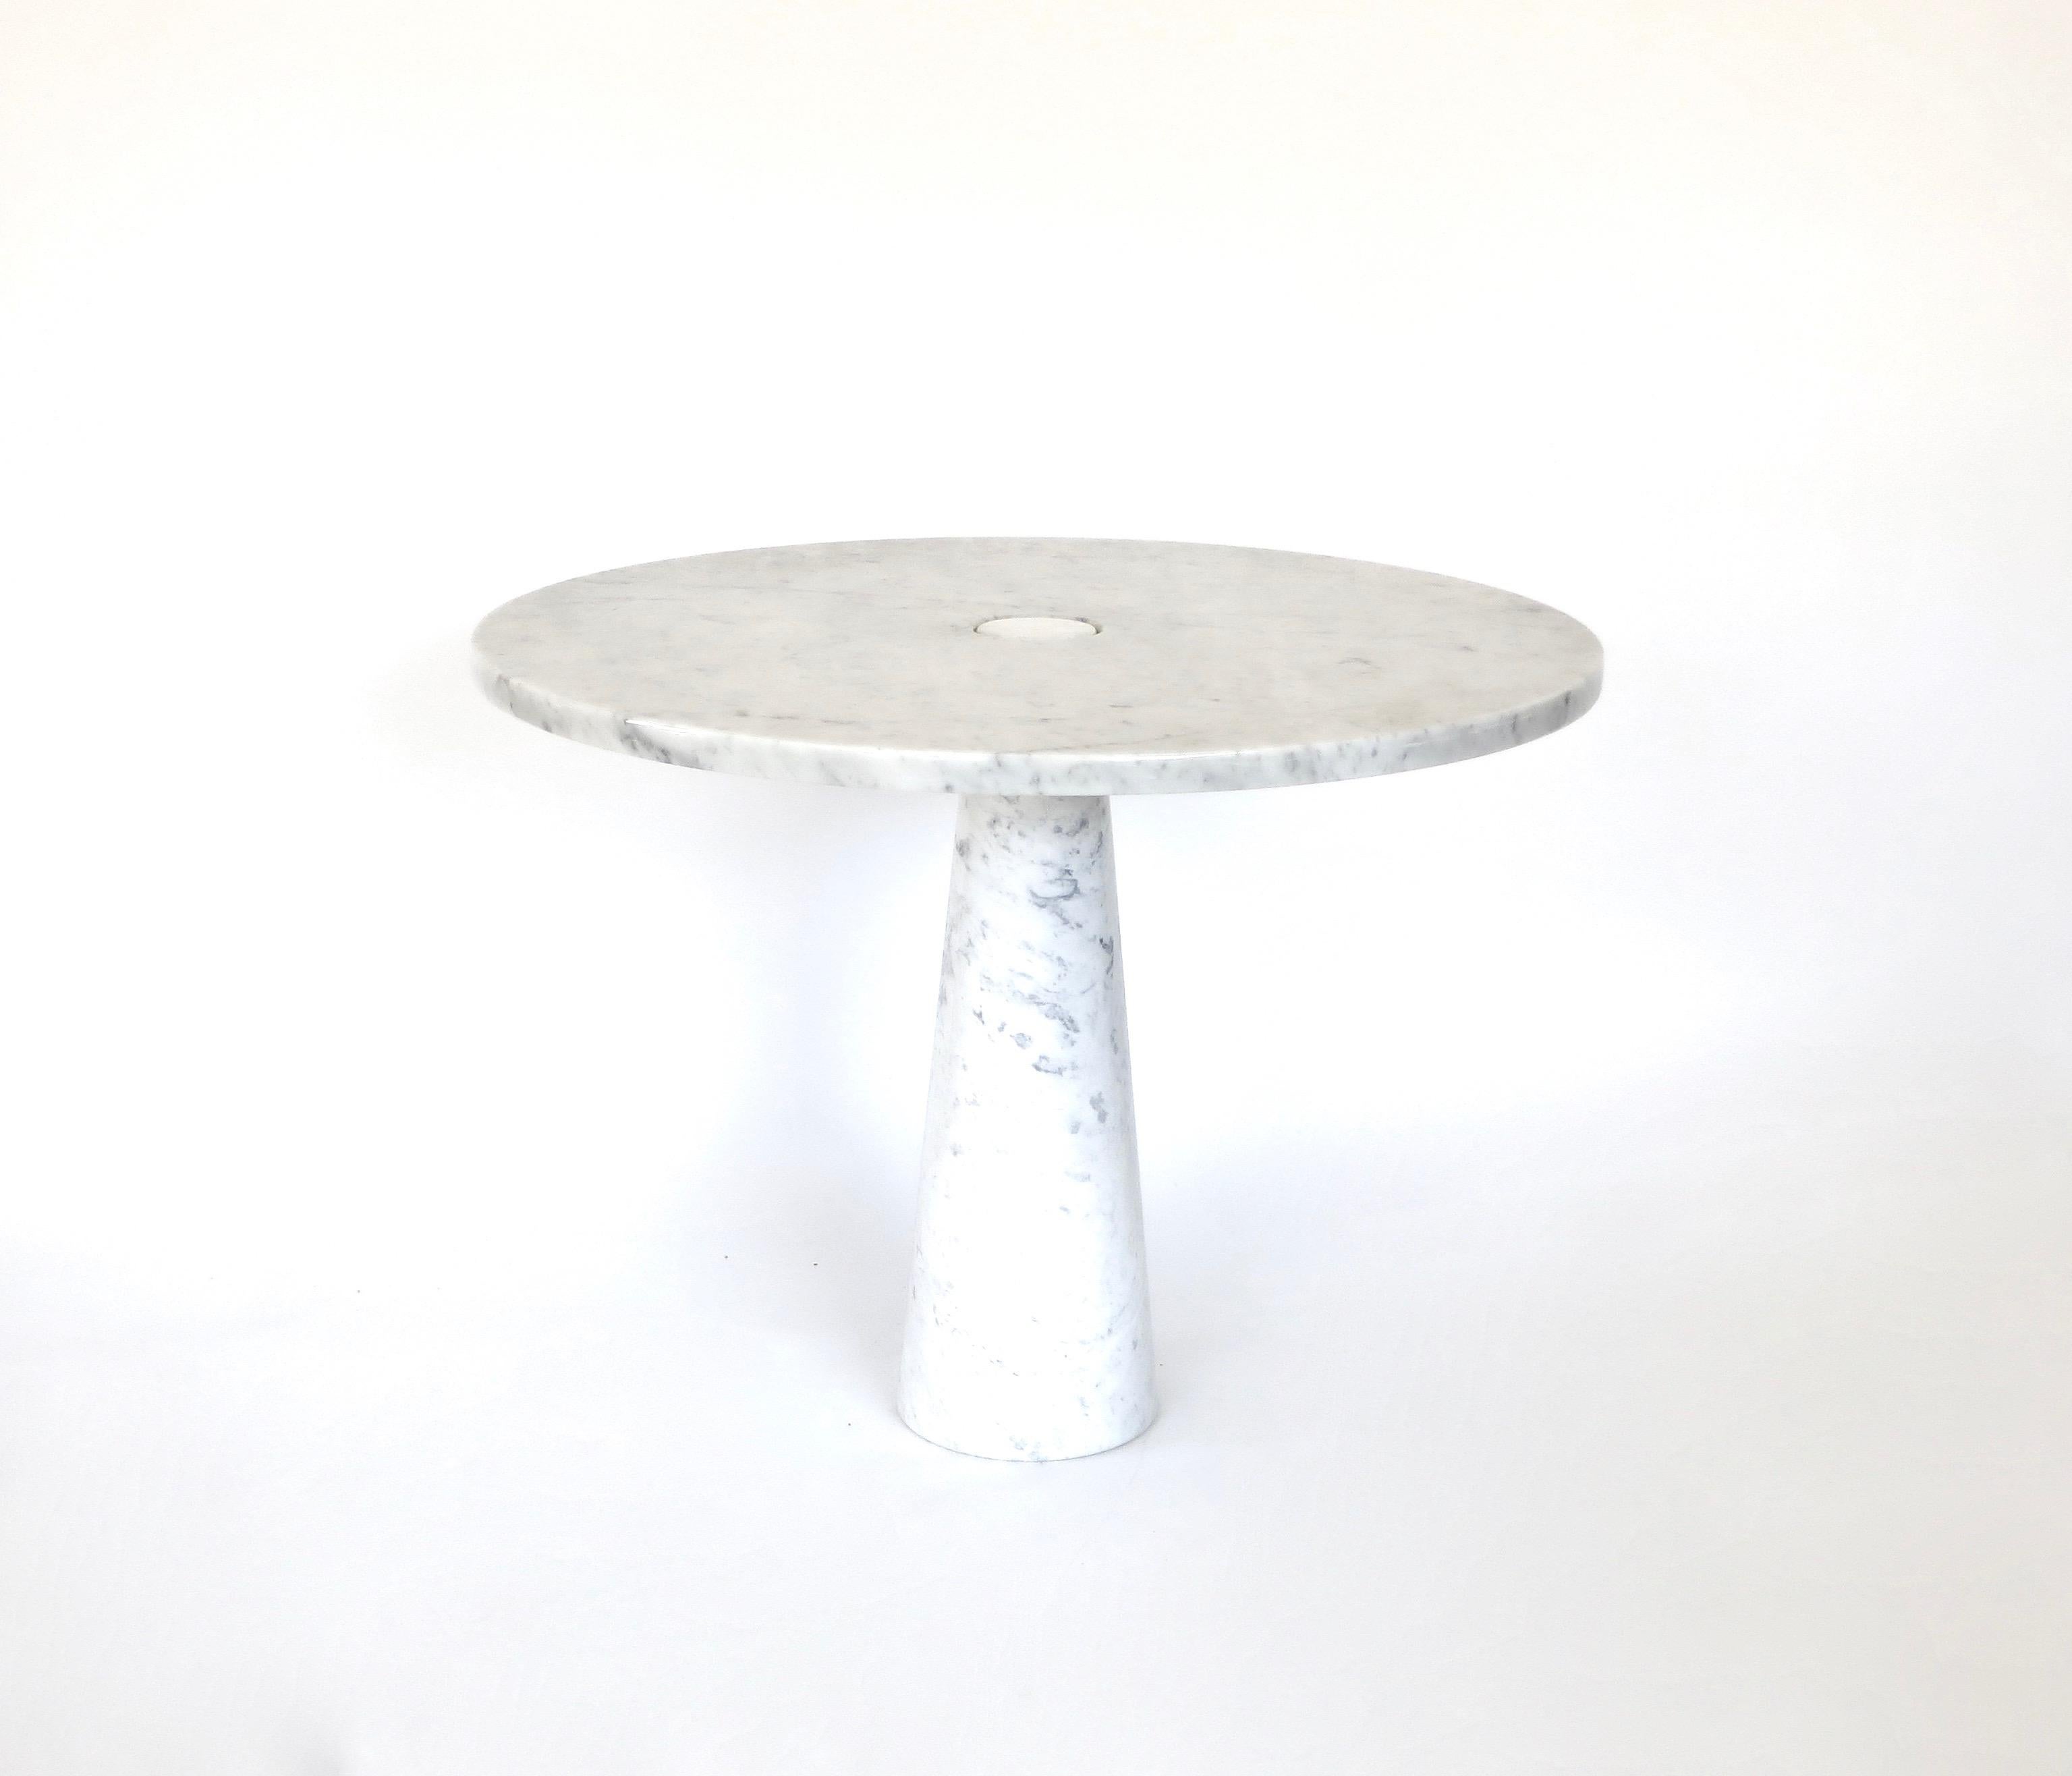 A Eros white Carrara marble dining or center table by Angelo Mangiarotti.
Eros collection for skipper. Vintage.
The structural design of the “Eros” tables involves gravity-based embedding between the top and leg made possible with the finely